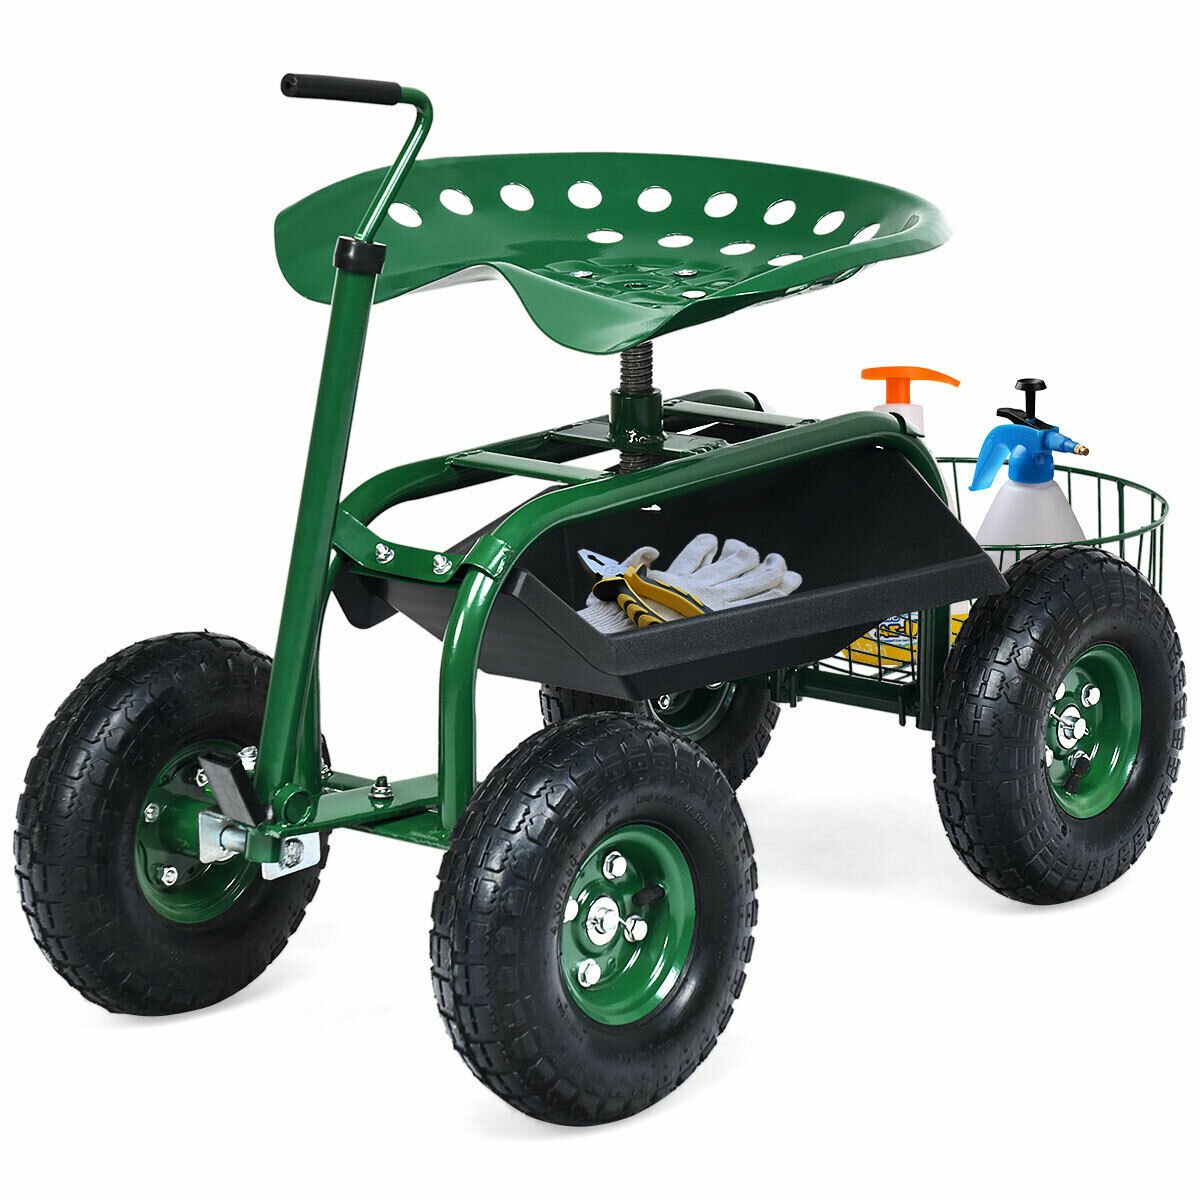 Extendable Handle Garden Cart Rolling Wagon Scooter, Green - Gallery Canada